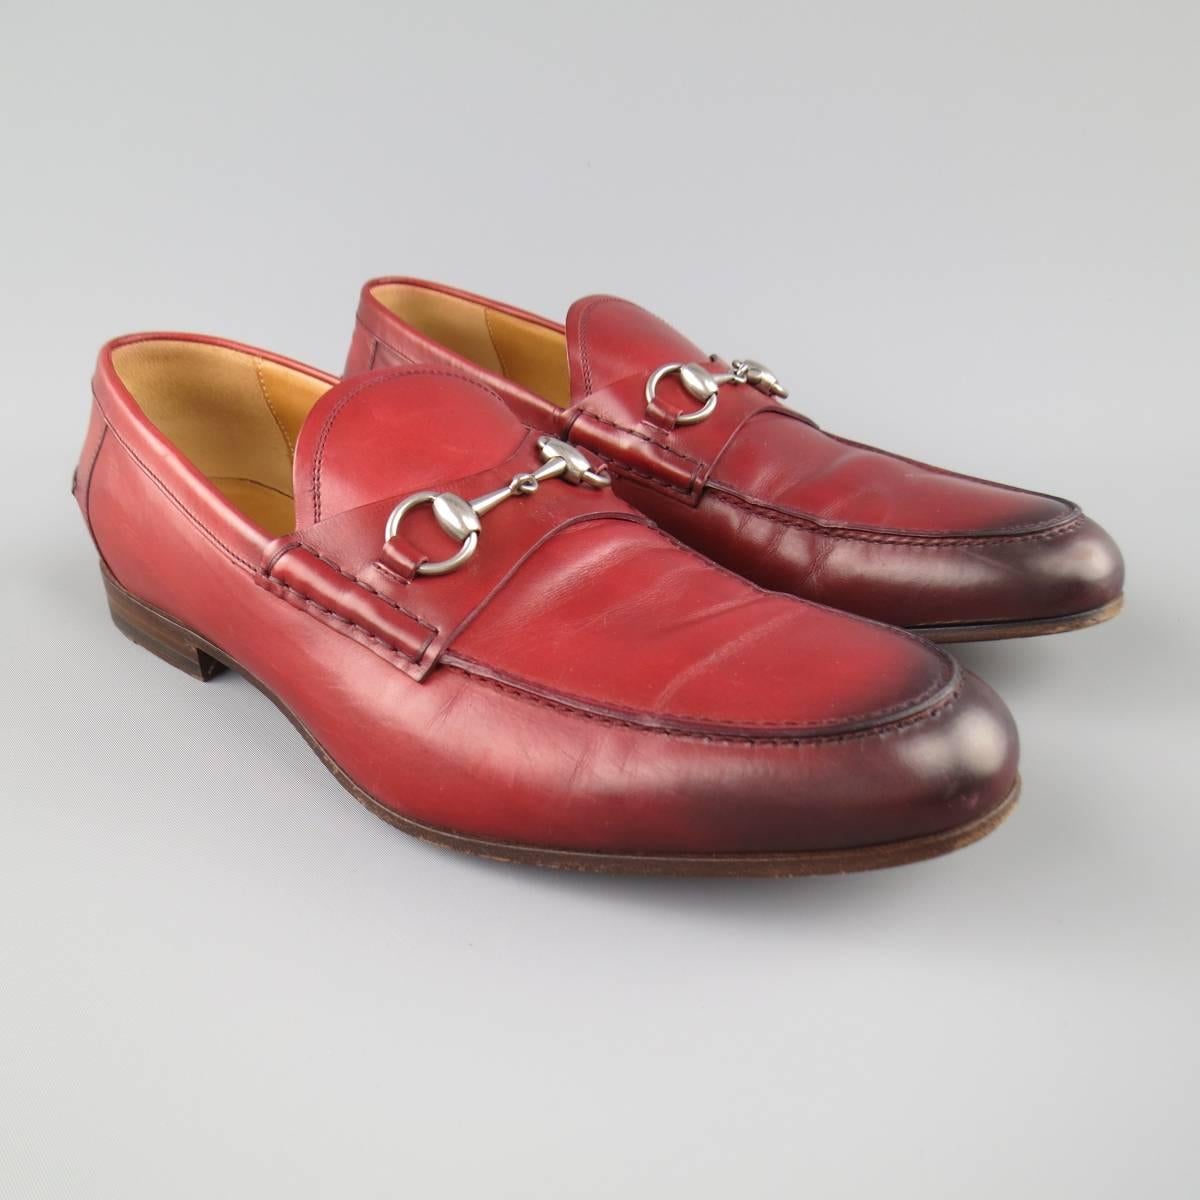 GUCCI Loafers consists of leather material in a brick color tone. Designed with a silver horse-bit, moc-stitching and burnish color pattern. Leather lining and sole. Wear throughout. Comes with original box and cloth bag. Made in Italy.
 
Good